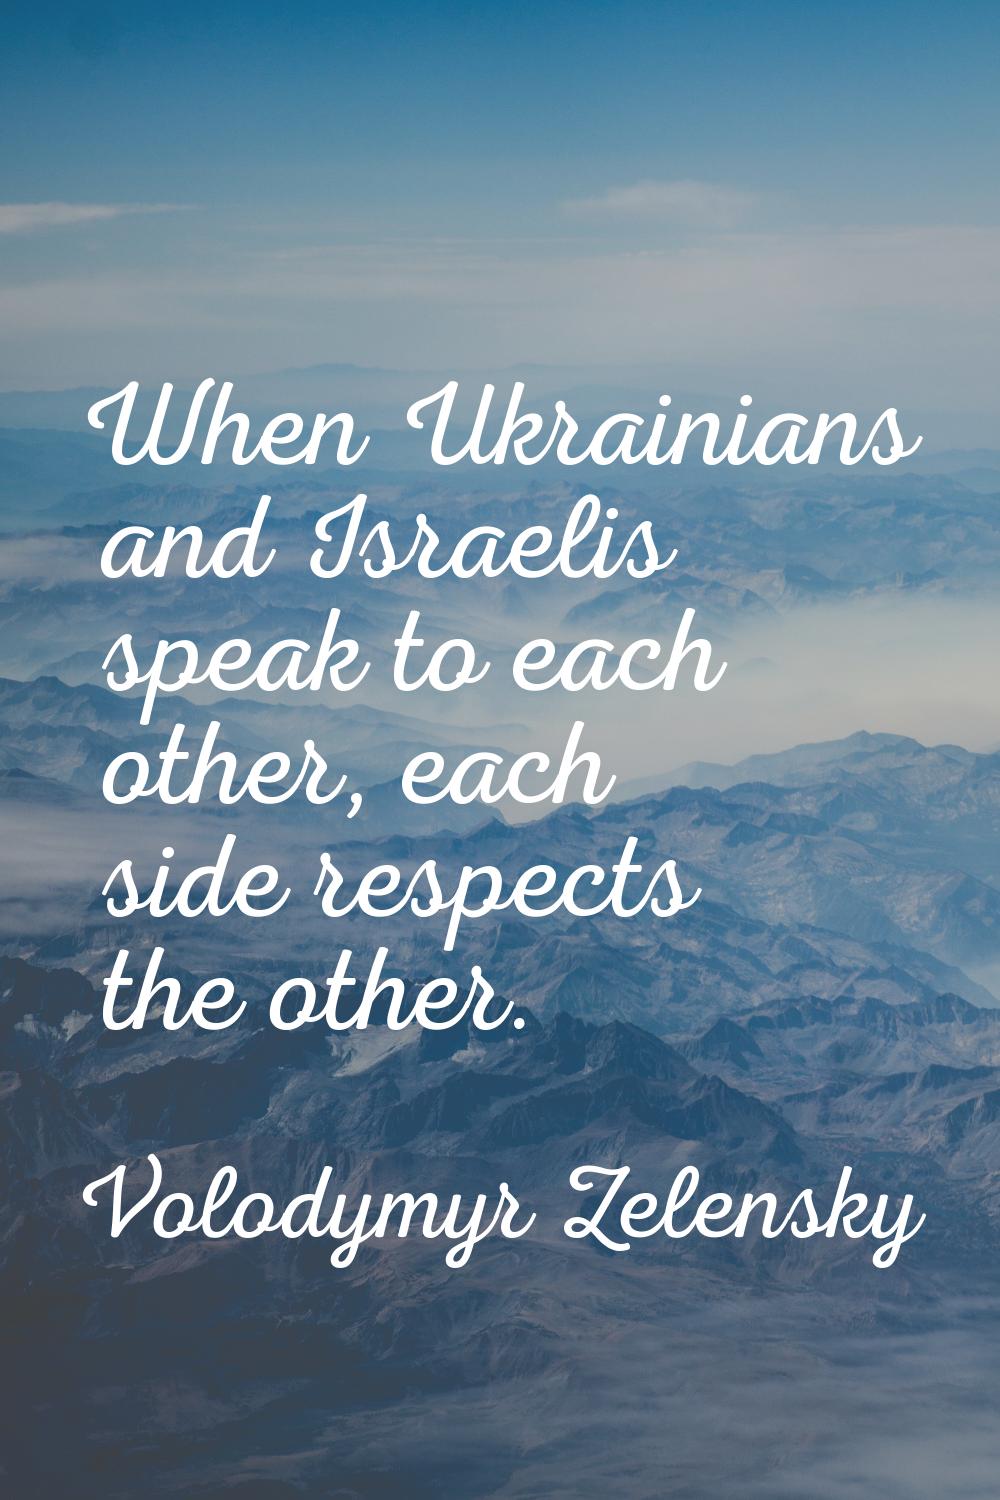 When Ukrainians and Israelis speak to each other, each side respects the other.